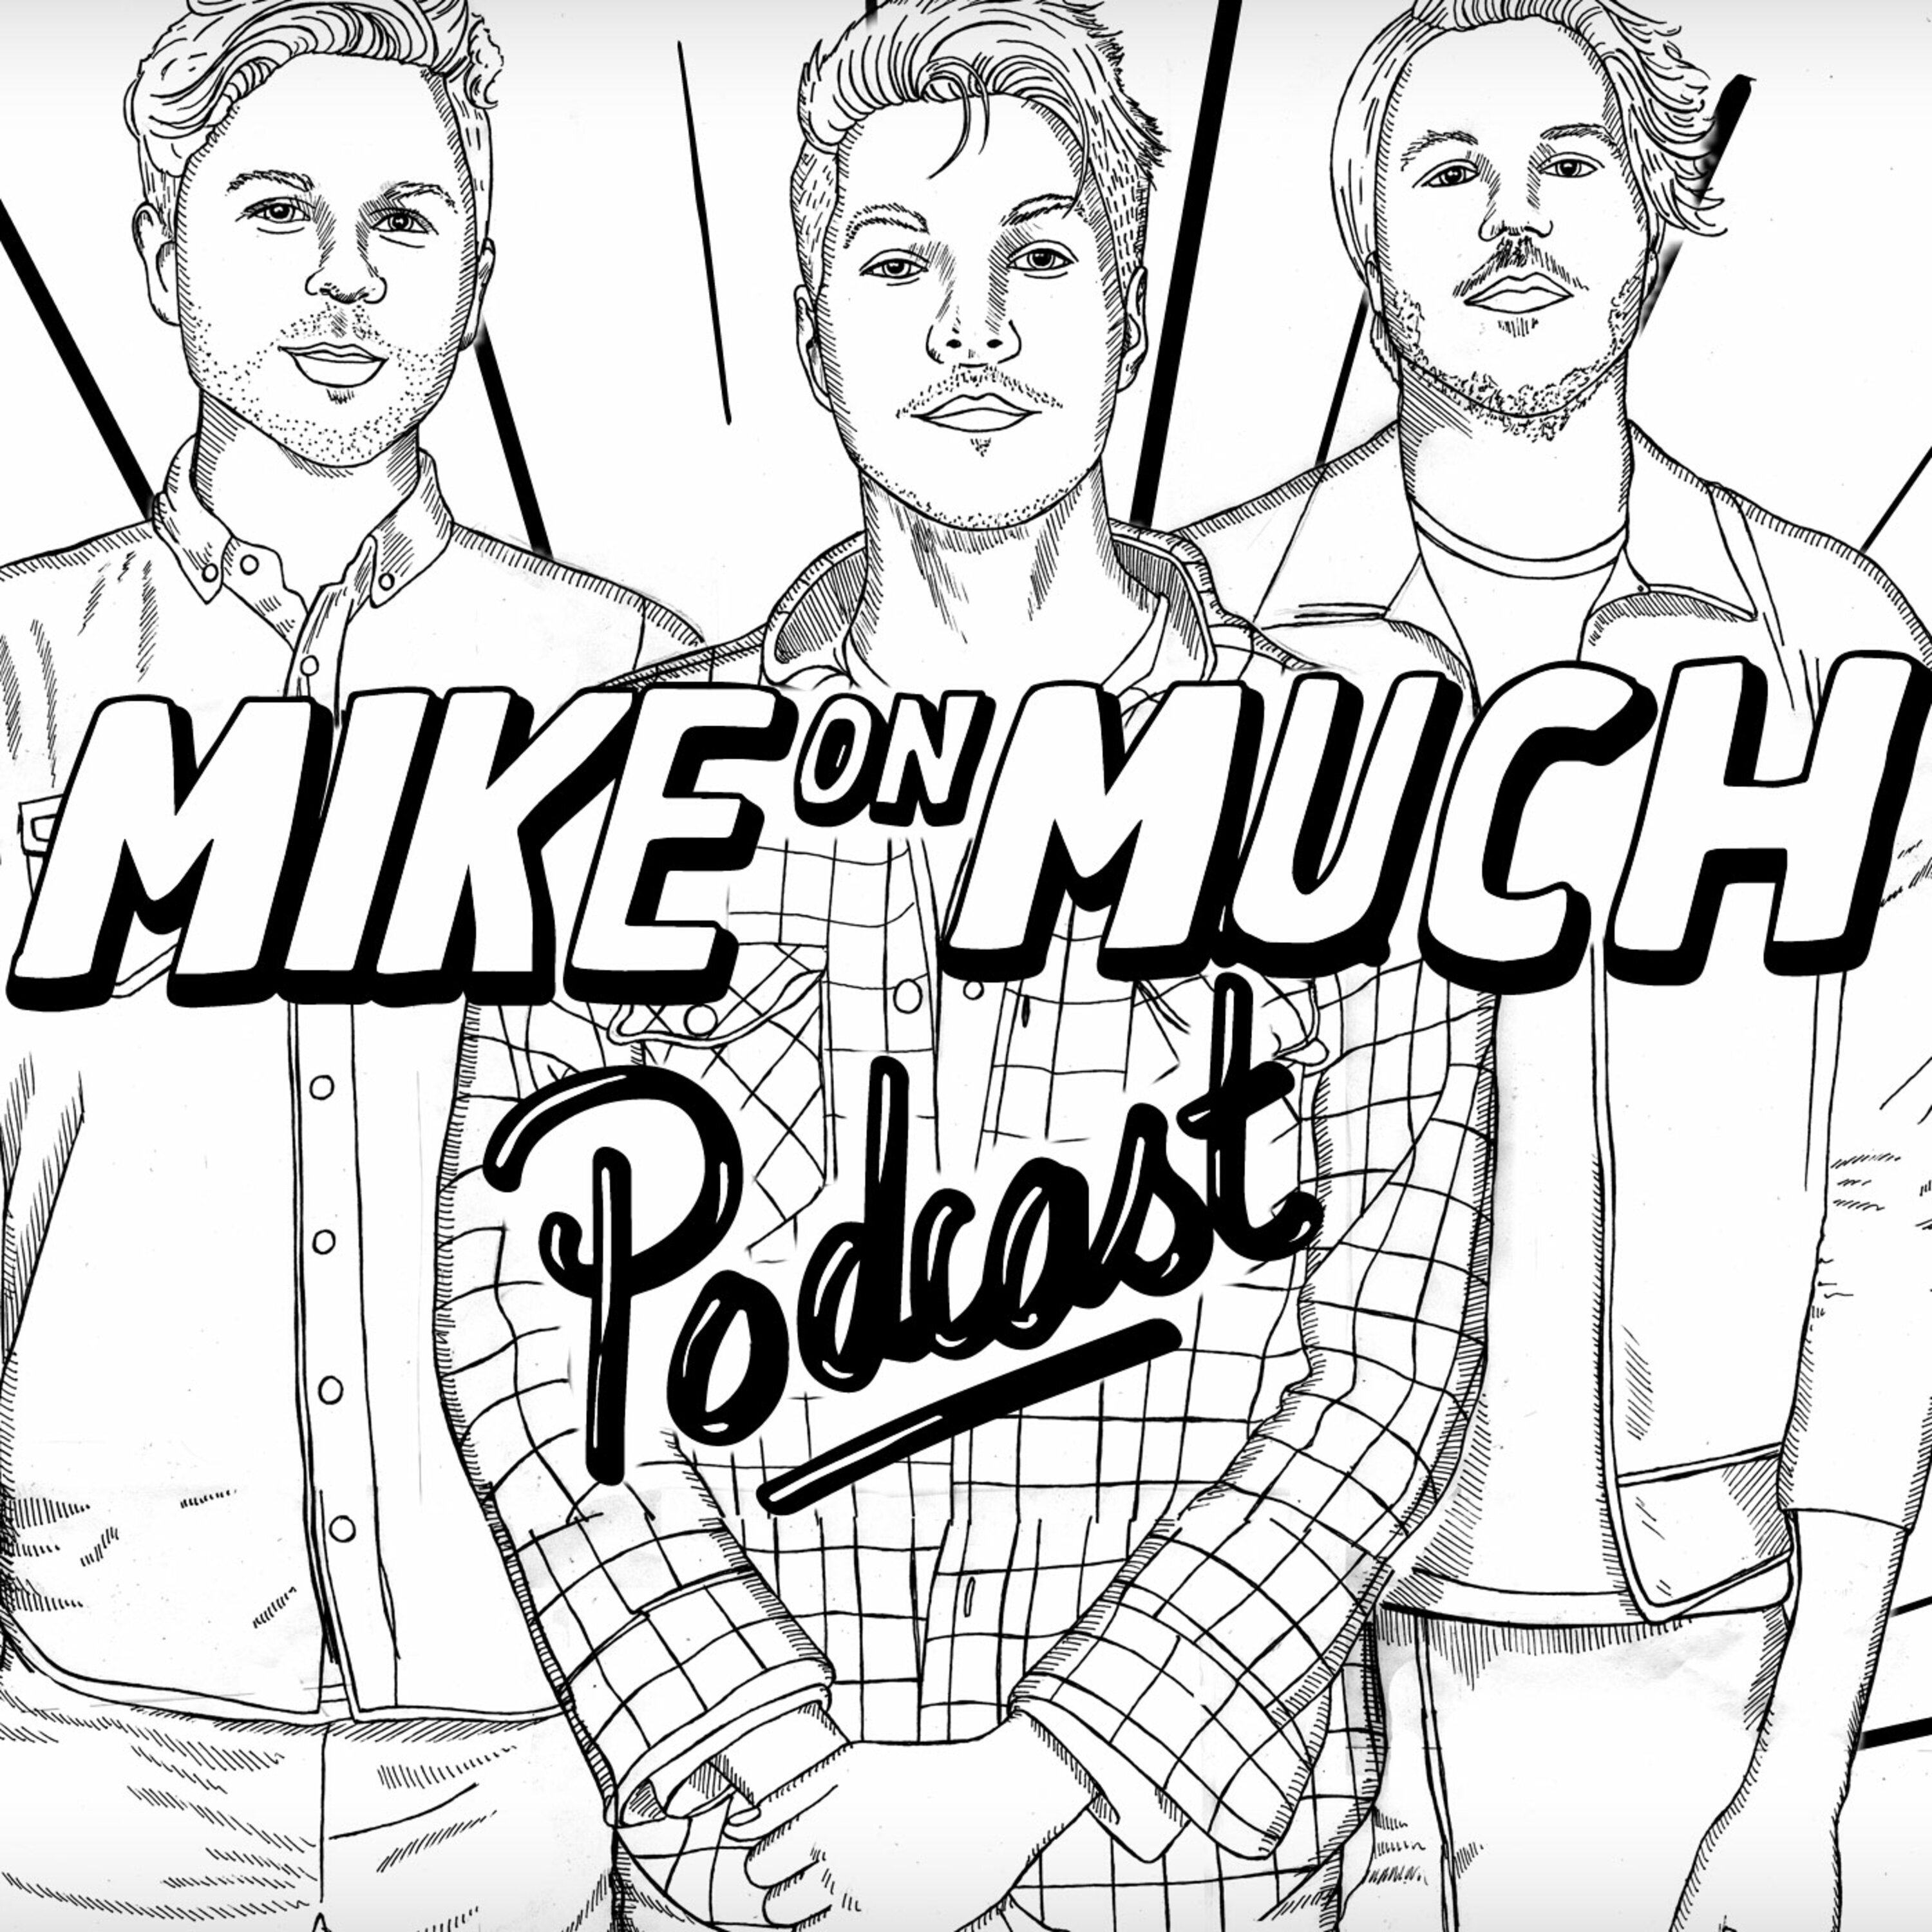 Season 1 Mike On Much: “My Brain Can’t Stop Thinking Of Jokes”